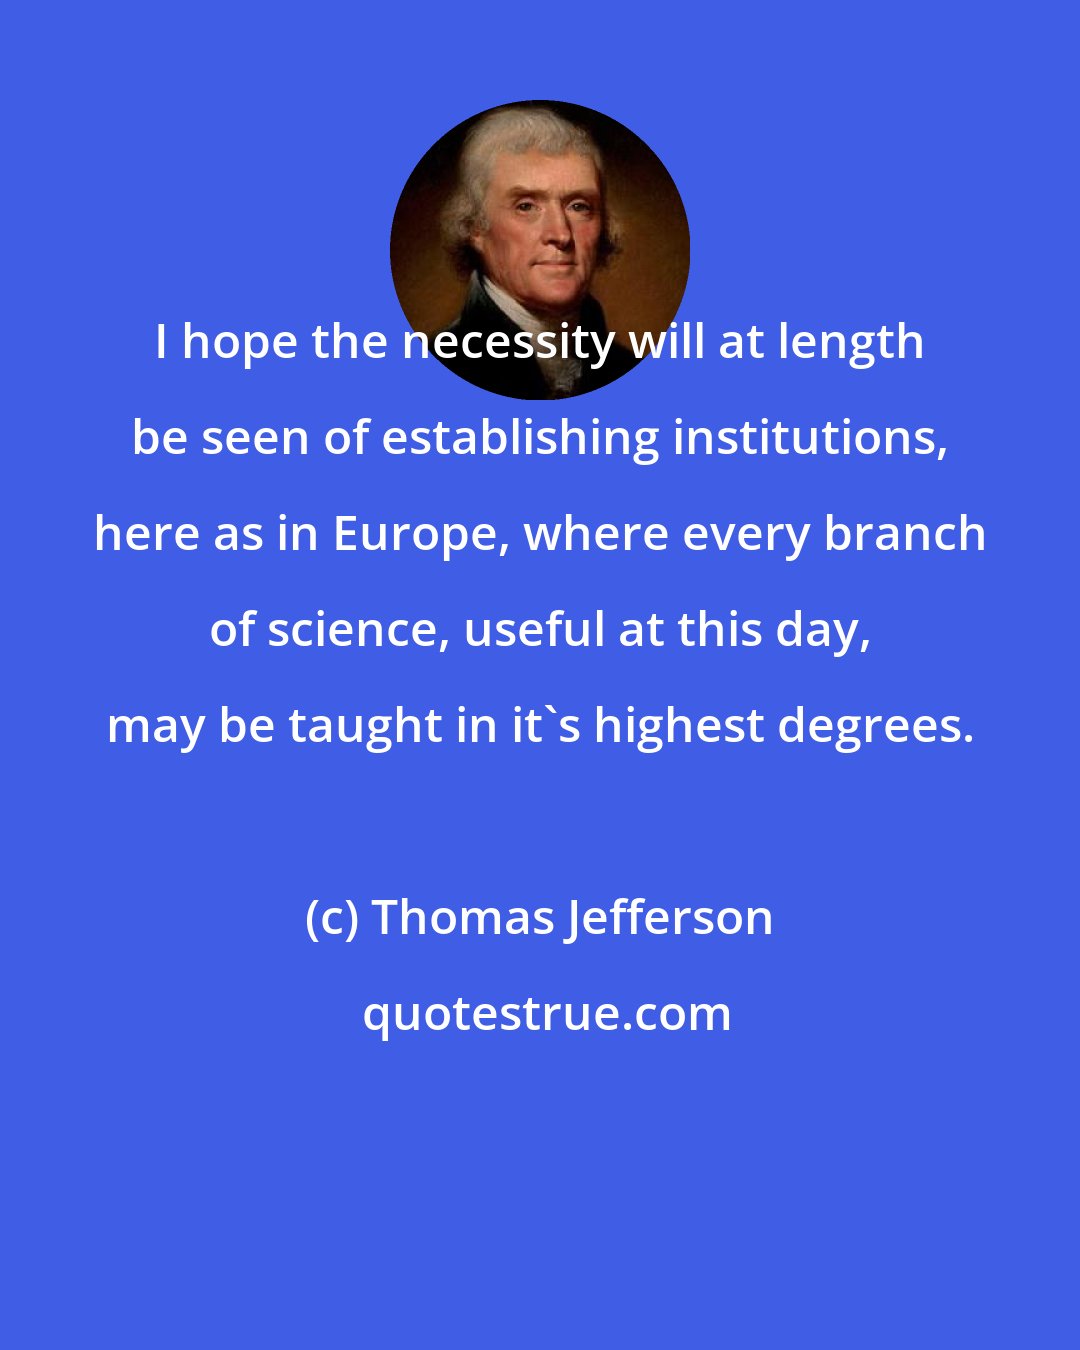 Thomas Jefferson: I hope the necessity will at length be seen of establishing institutions, here as in Europe, where every branch of science, useful at this day, may be taught in it's highest degrees.